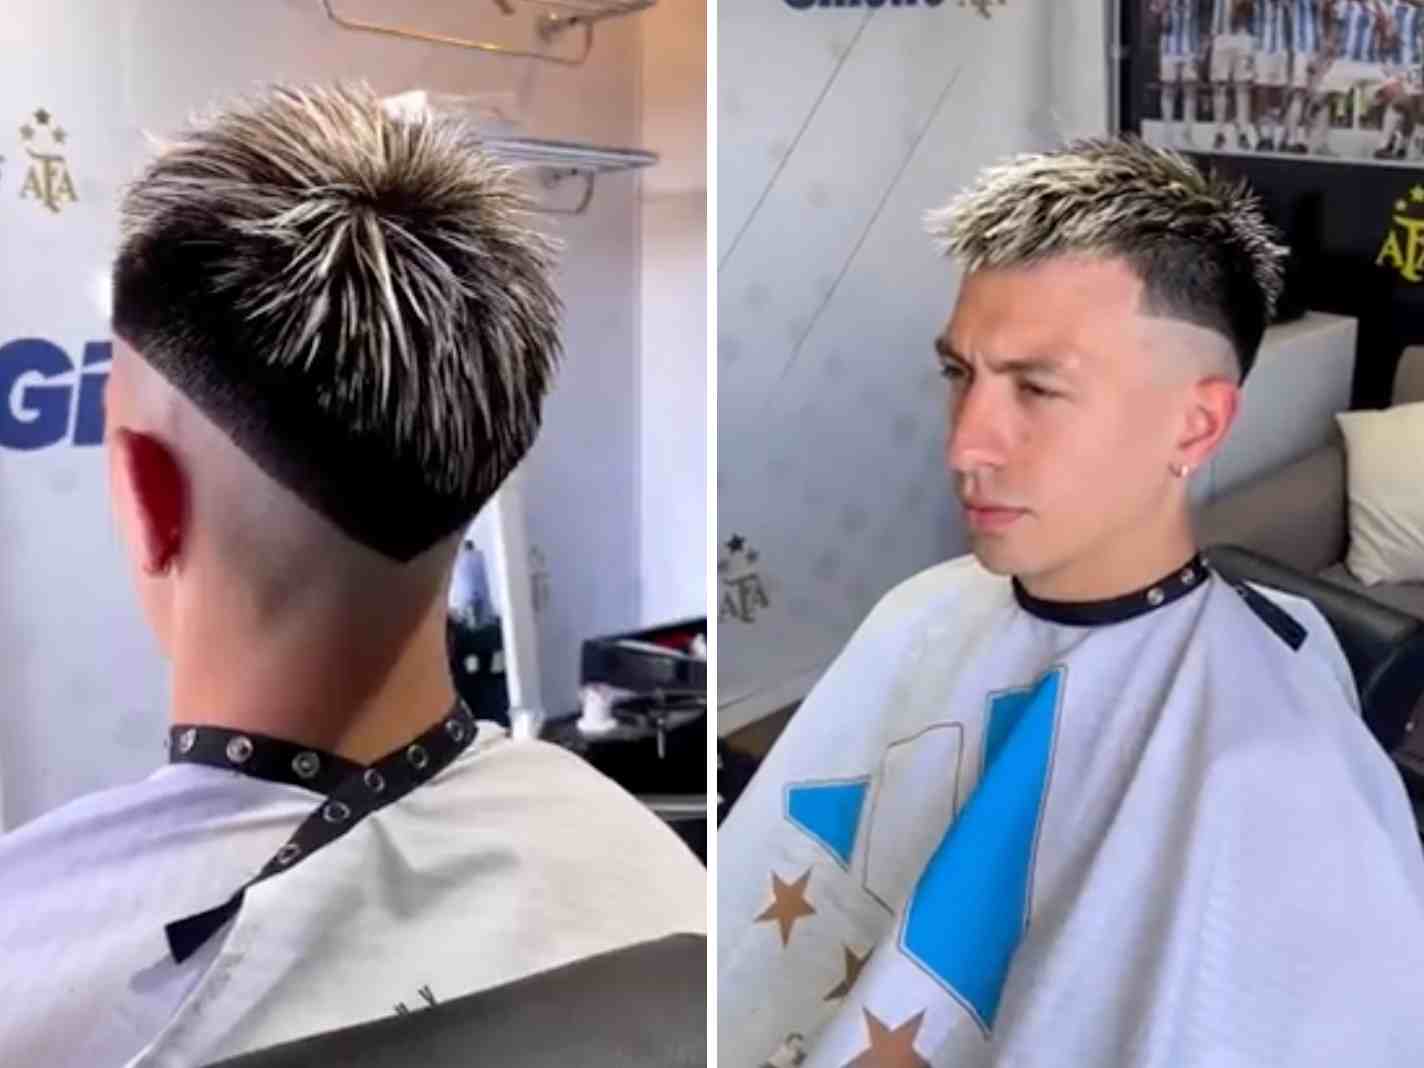 Fans Roast Lisandro Martinez Over New Hedgehog Spines Hairstyle